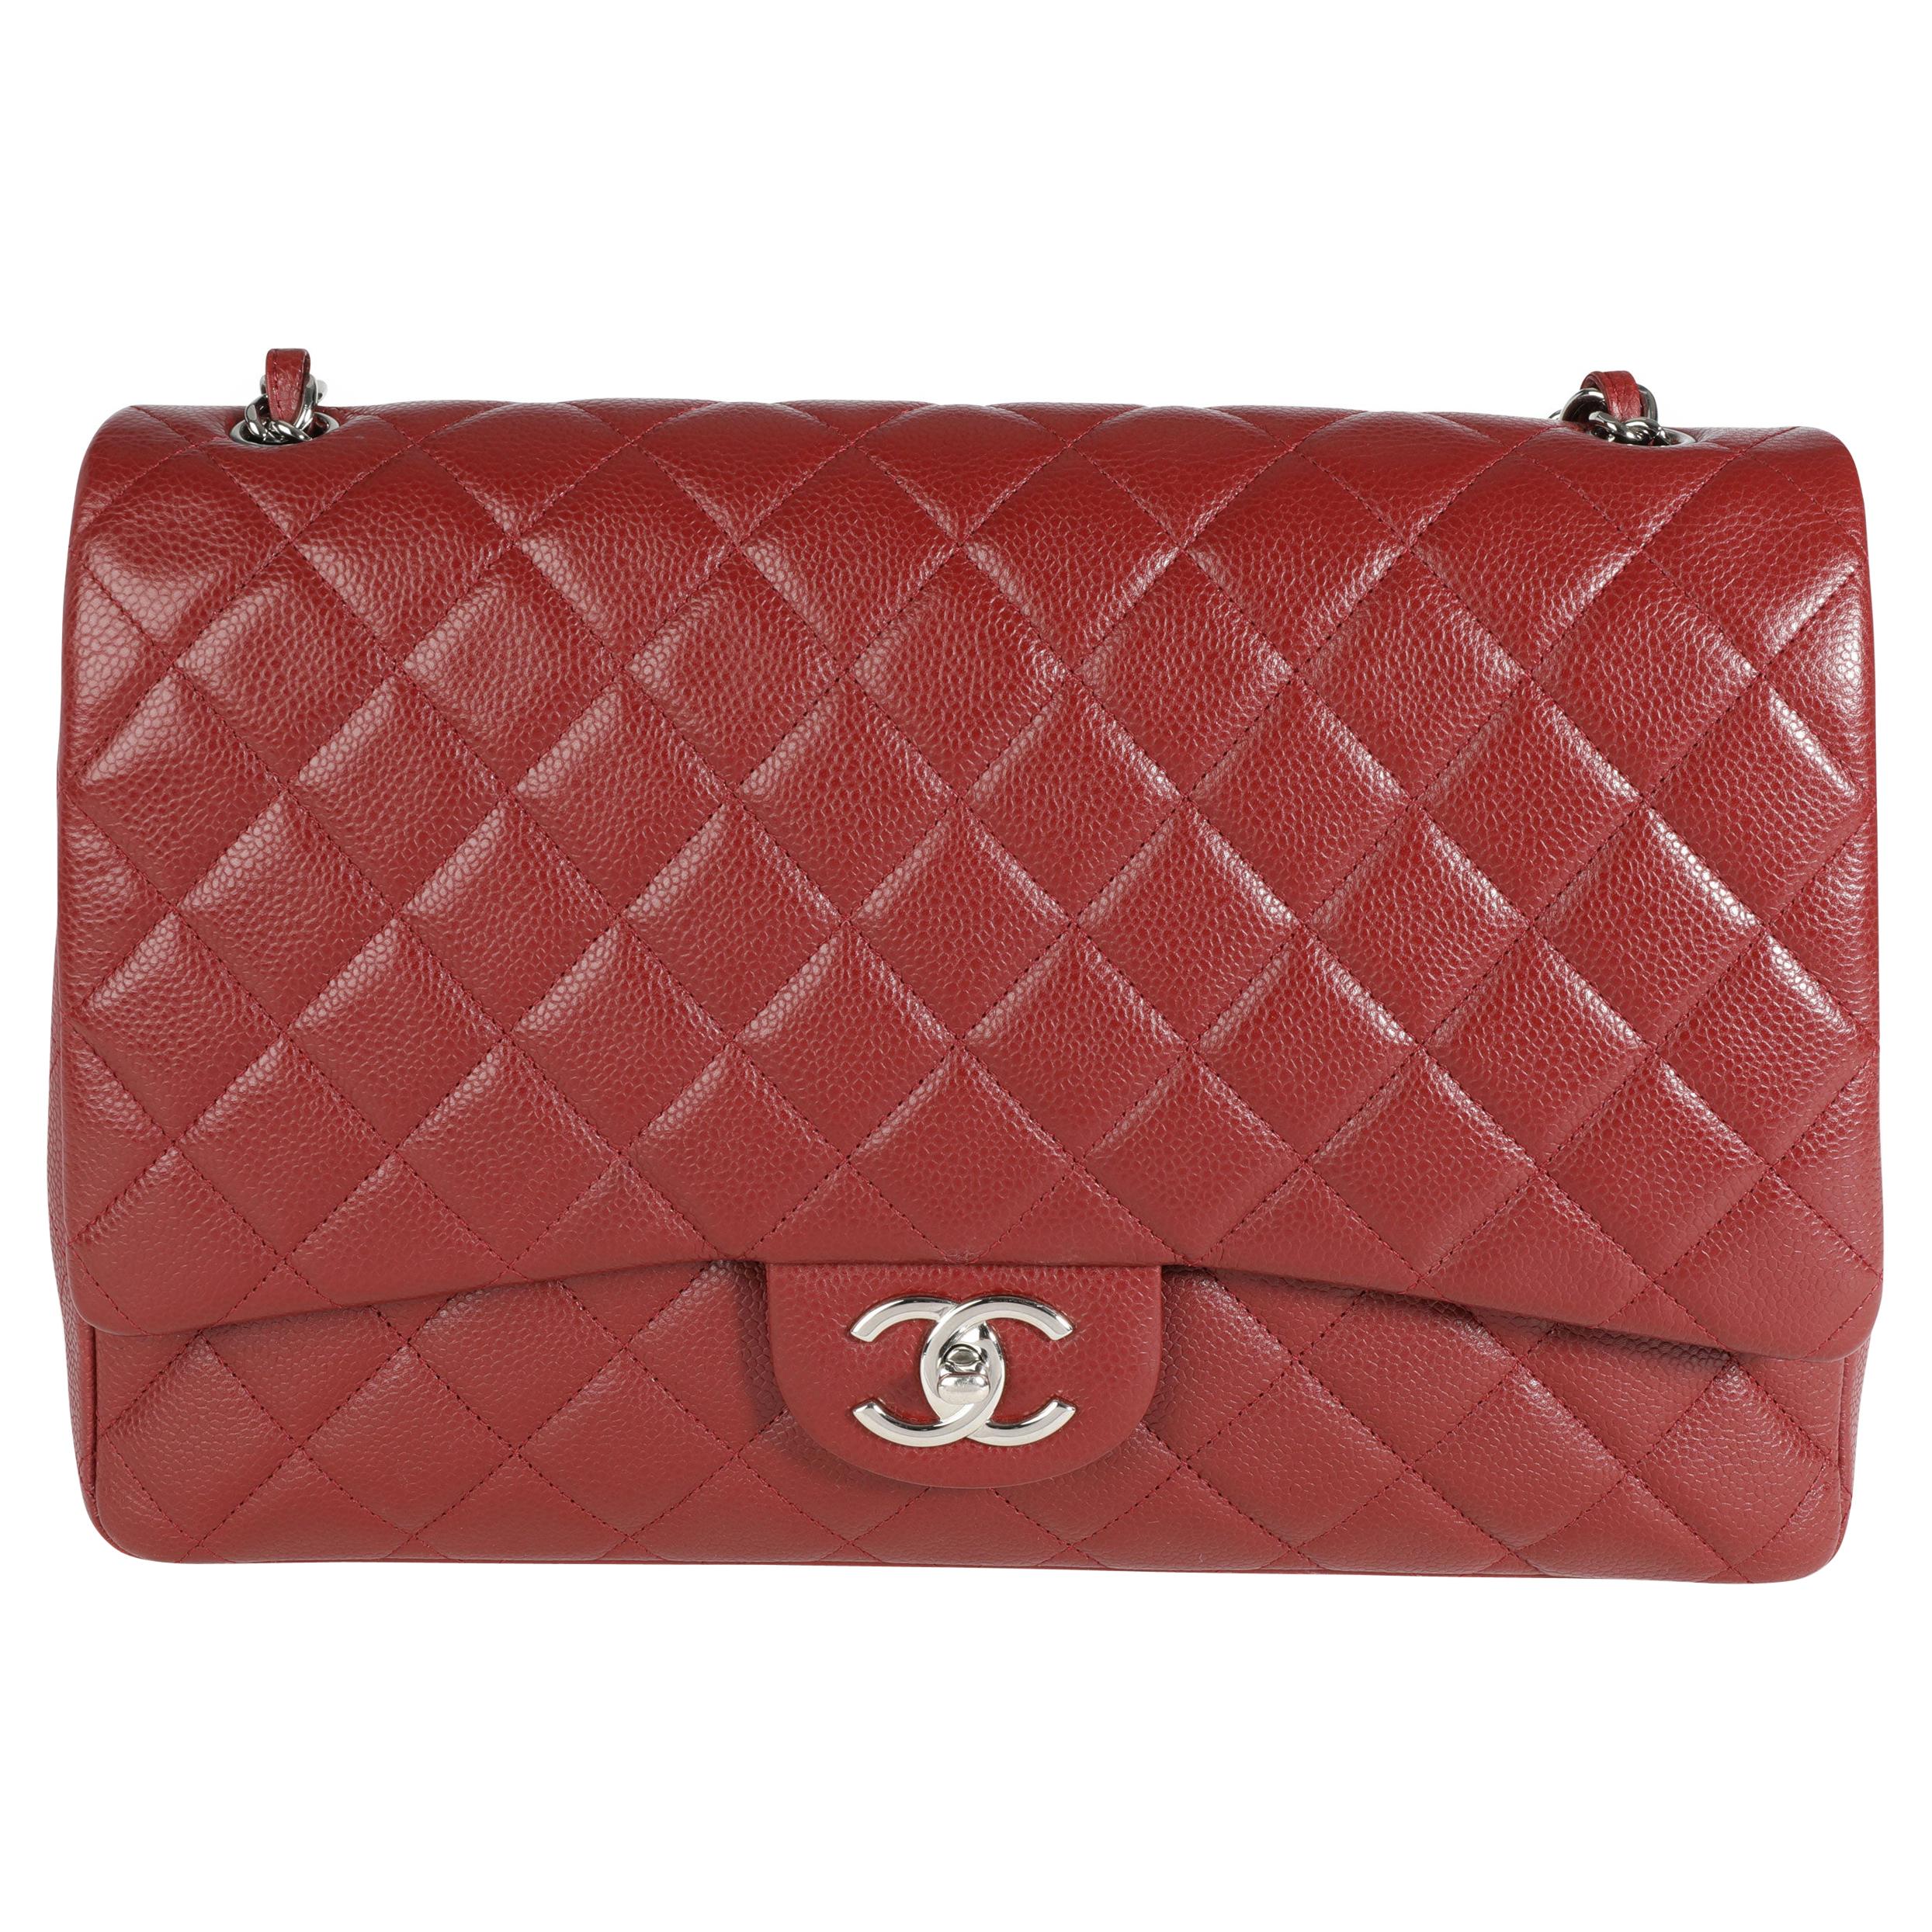 Chanel Burgundy Quilted Caviar Maxi Classic Double Flap Bag